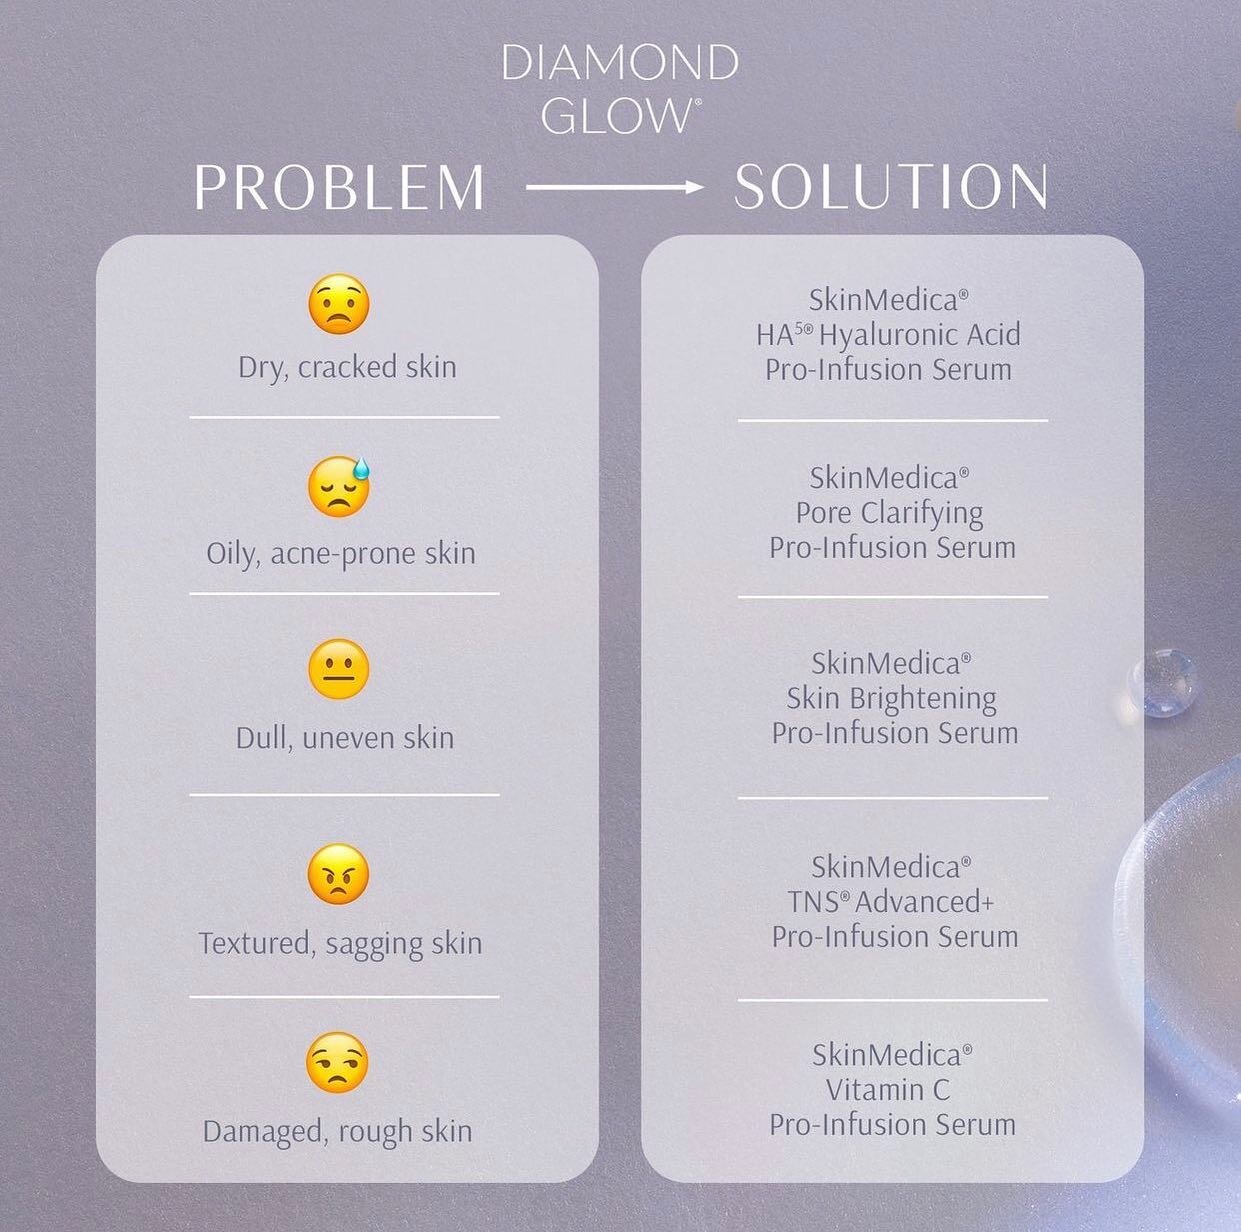 No matter your skin concern, #DiamondGlow has a solution ✨ Drop the corresponding emoji with your concern in the comments below ⬇️

&mdash;

BOOK A DIAMONDGLOW FACIAL APPOINTMENT AT WWW.URBANALLURESF.COM

&mdash;

The DiamondGlow&reg; device is a gen